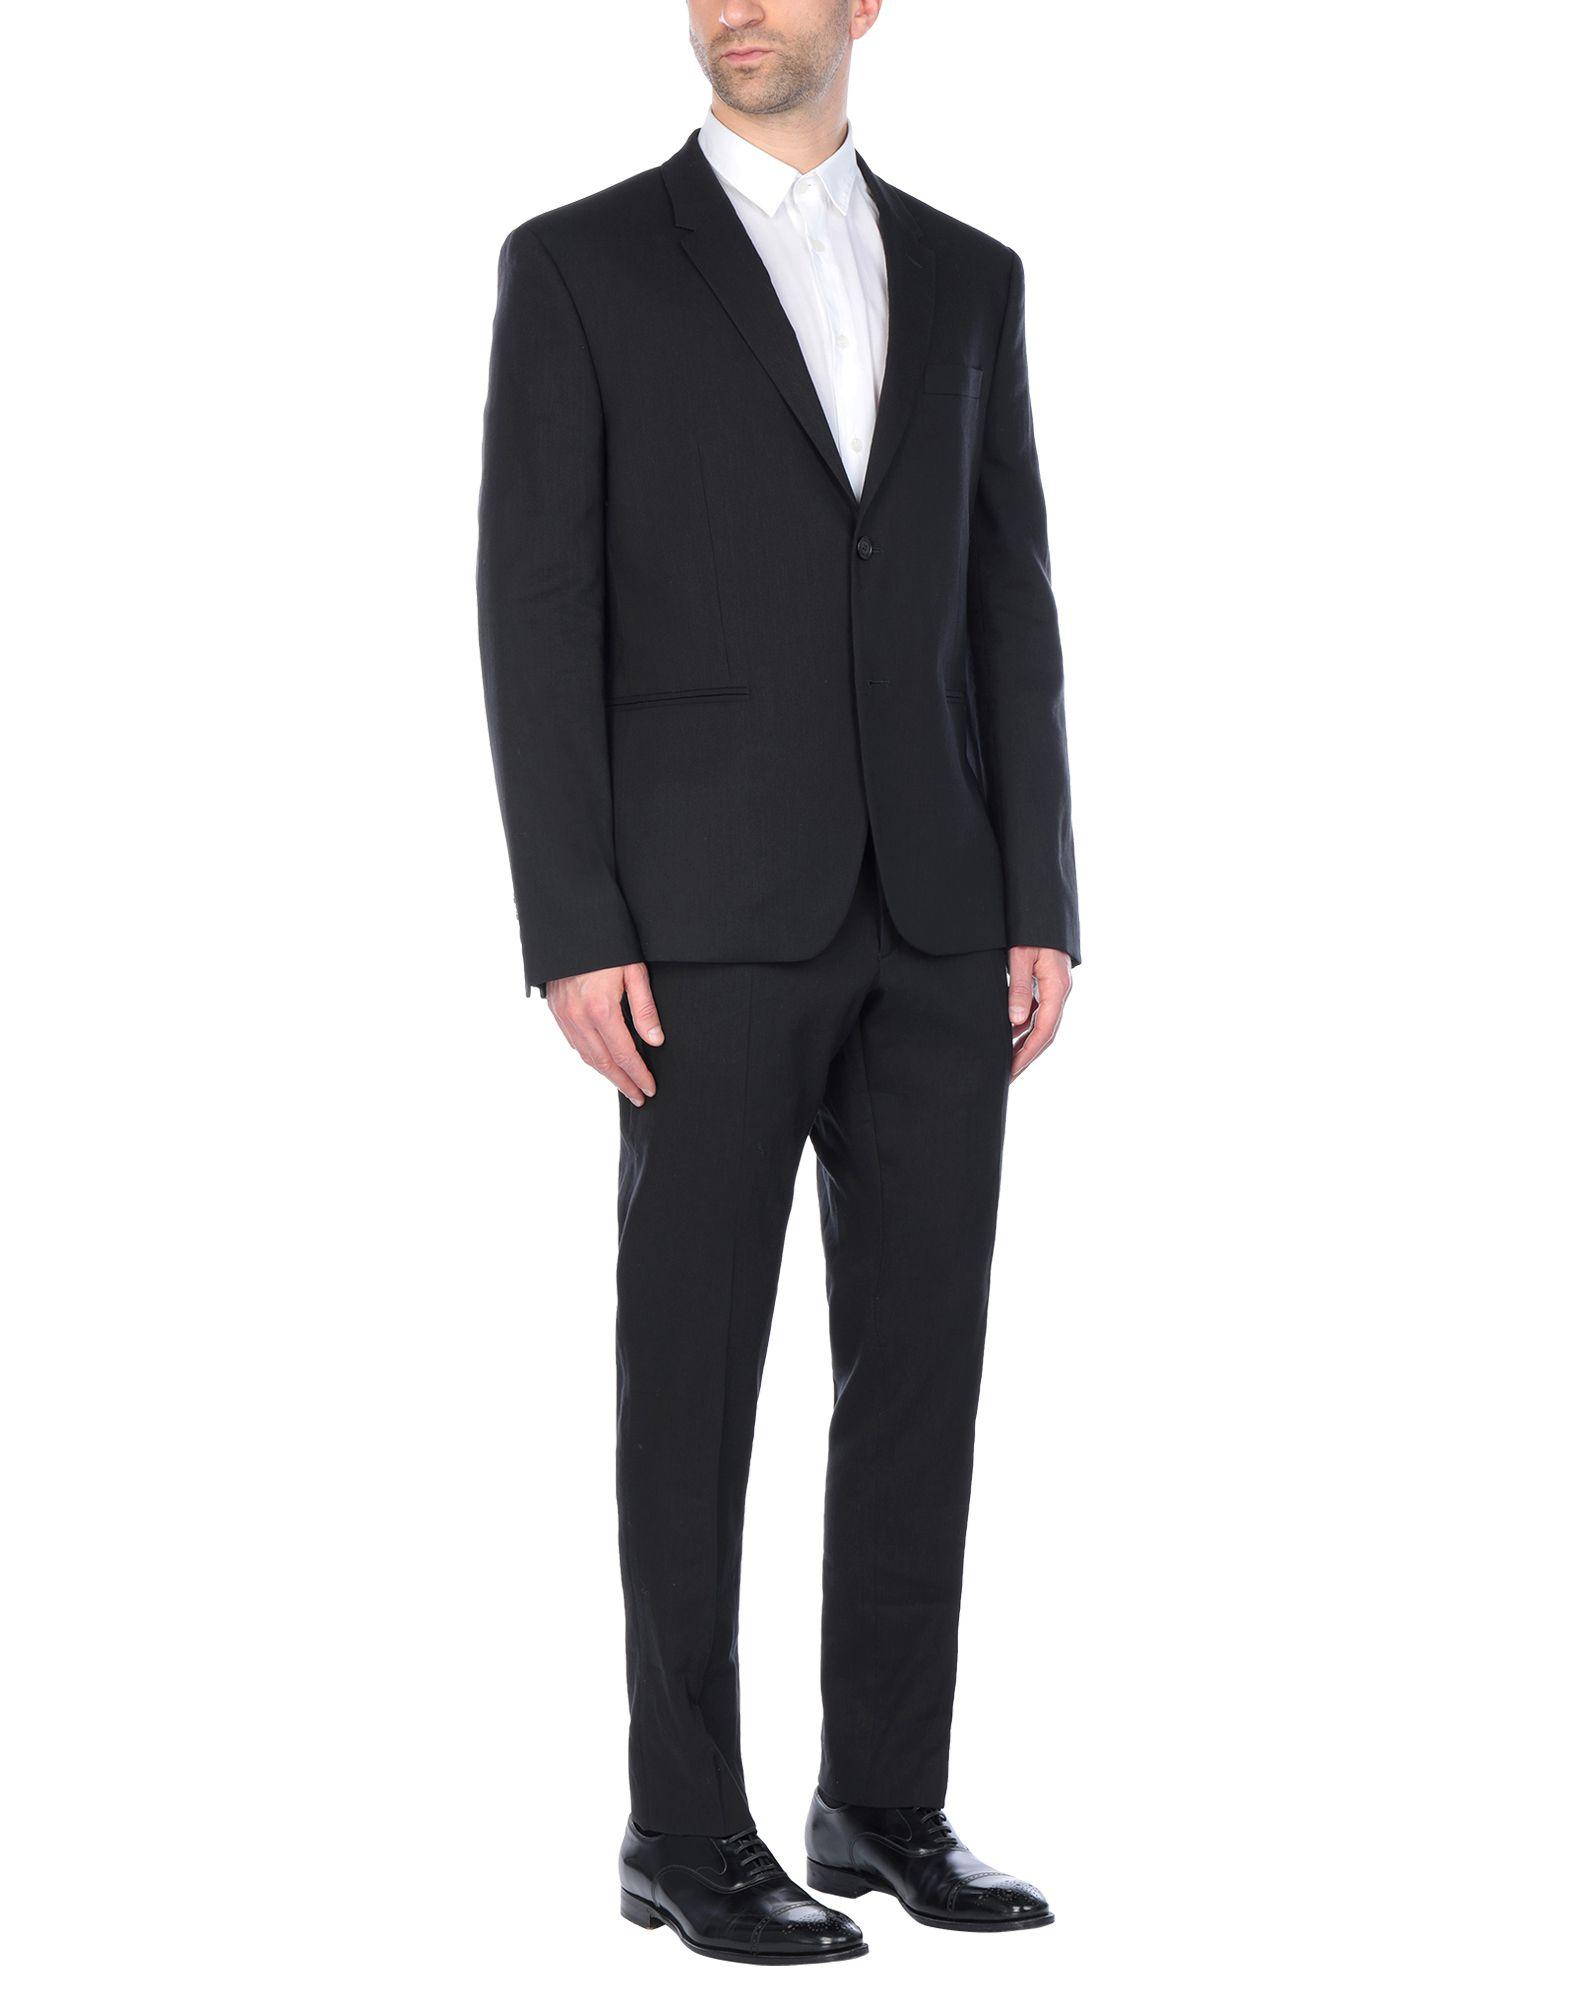 Versace Synthetic Suit in Black for Men - Lyst